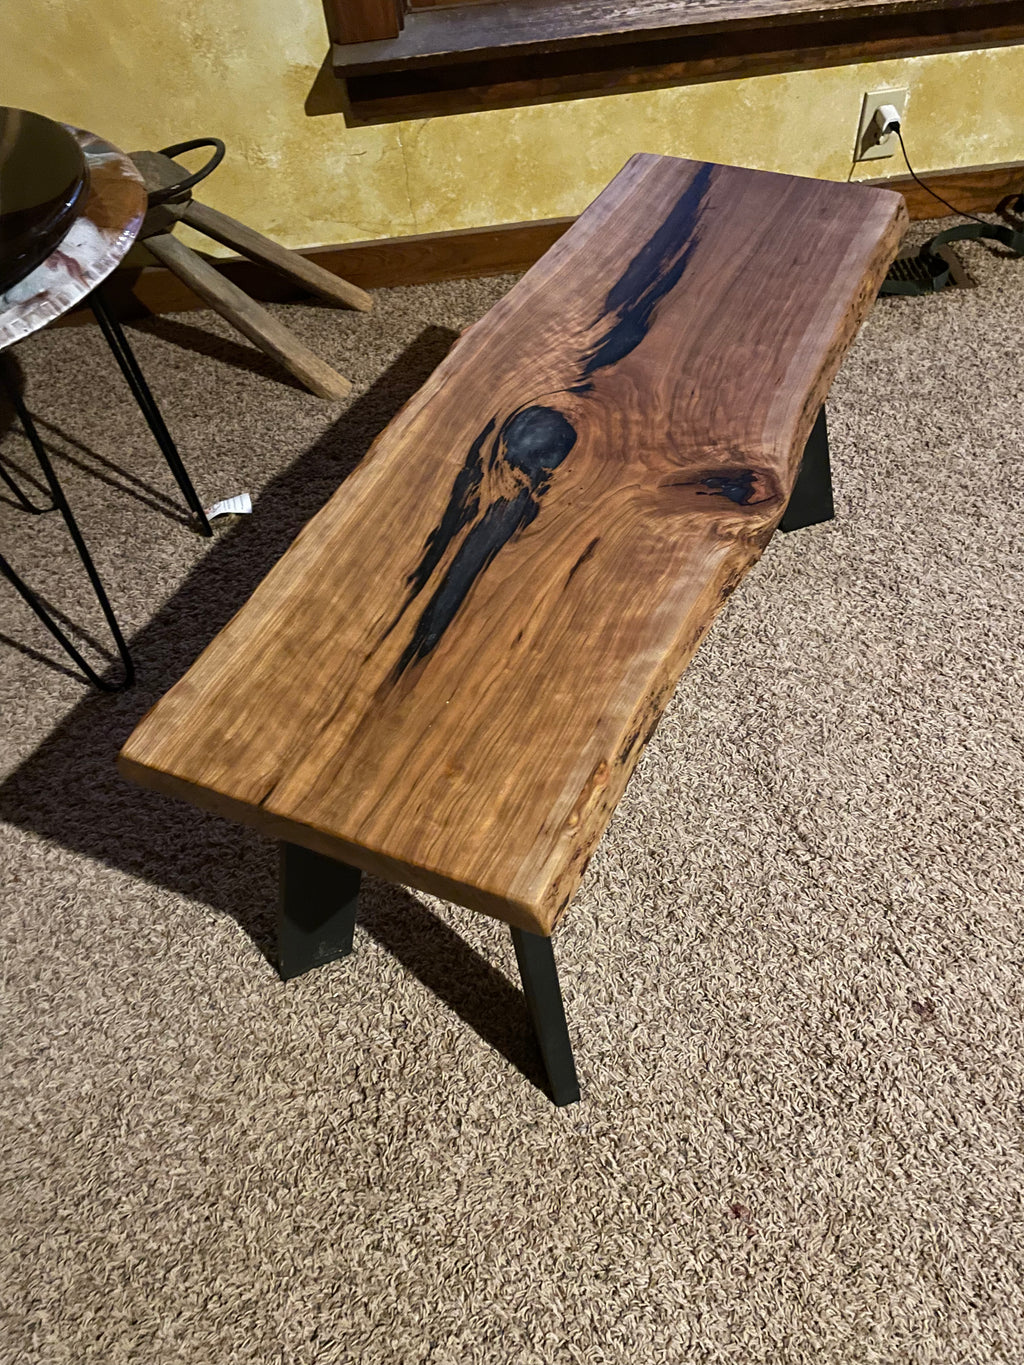 Live Edge  Cherry Slab Bench with Copper Accent Knot Hole